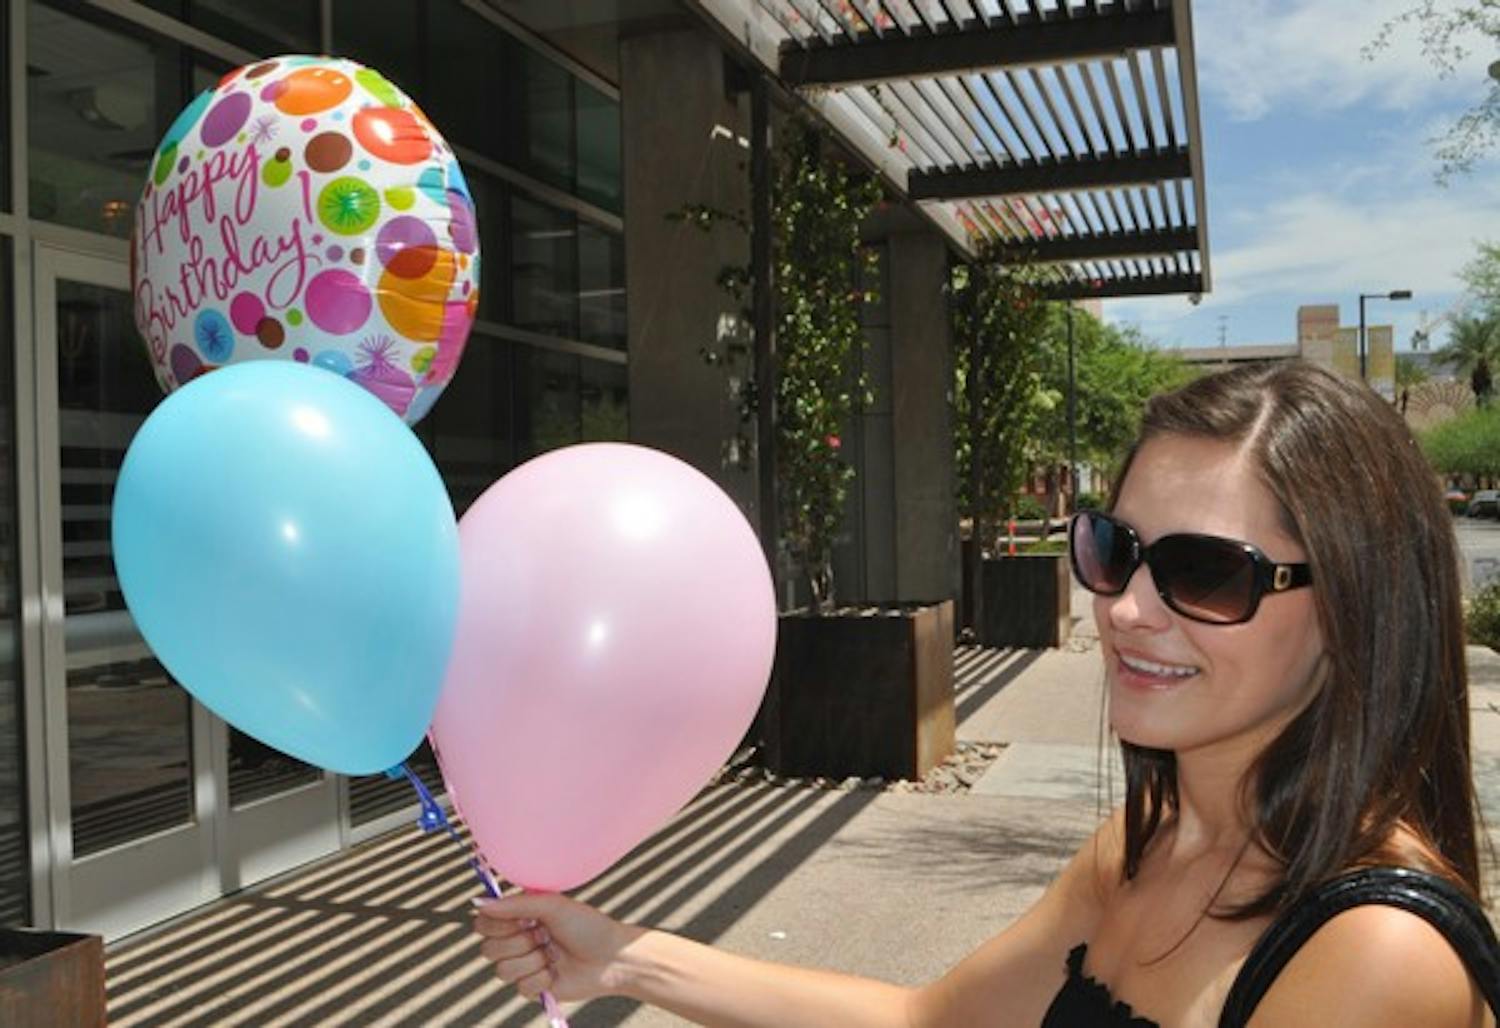 HAPPY BIRTHDAY: Emily Parks, a sophomore in social work shows off balloons for her roommate's birthday outside of Taylor Place on the downtown campus. (Photo by Christopher Leone)